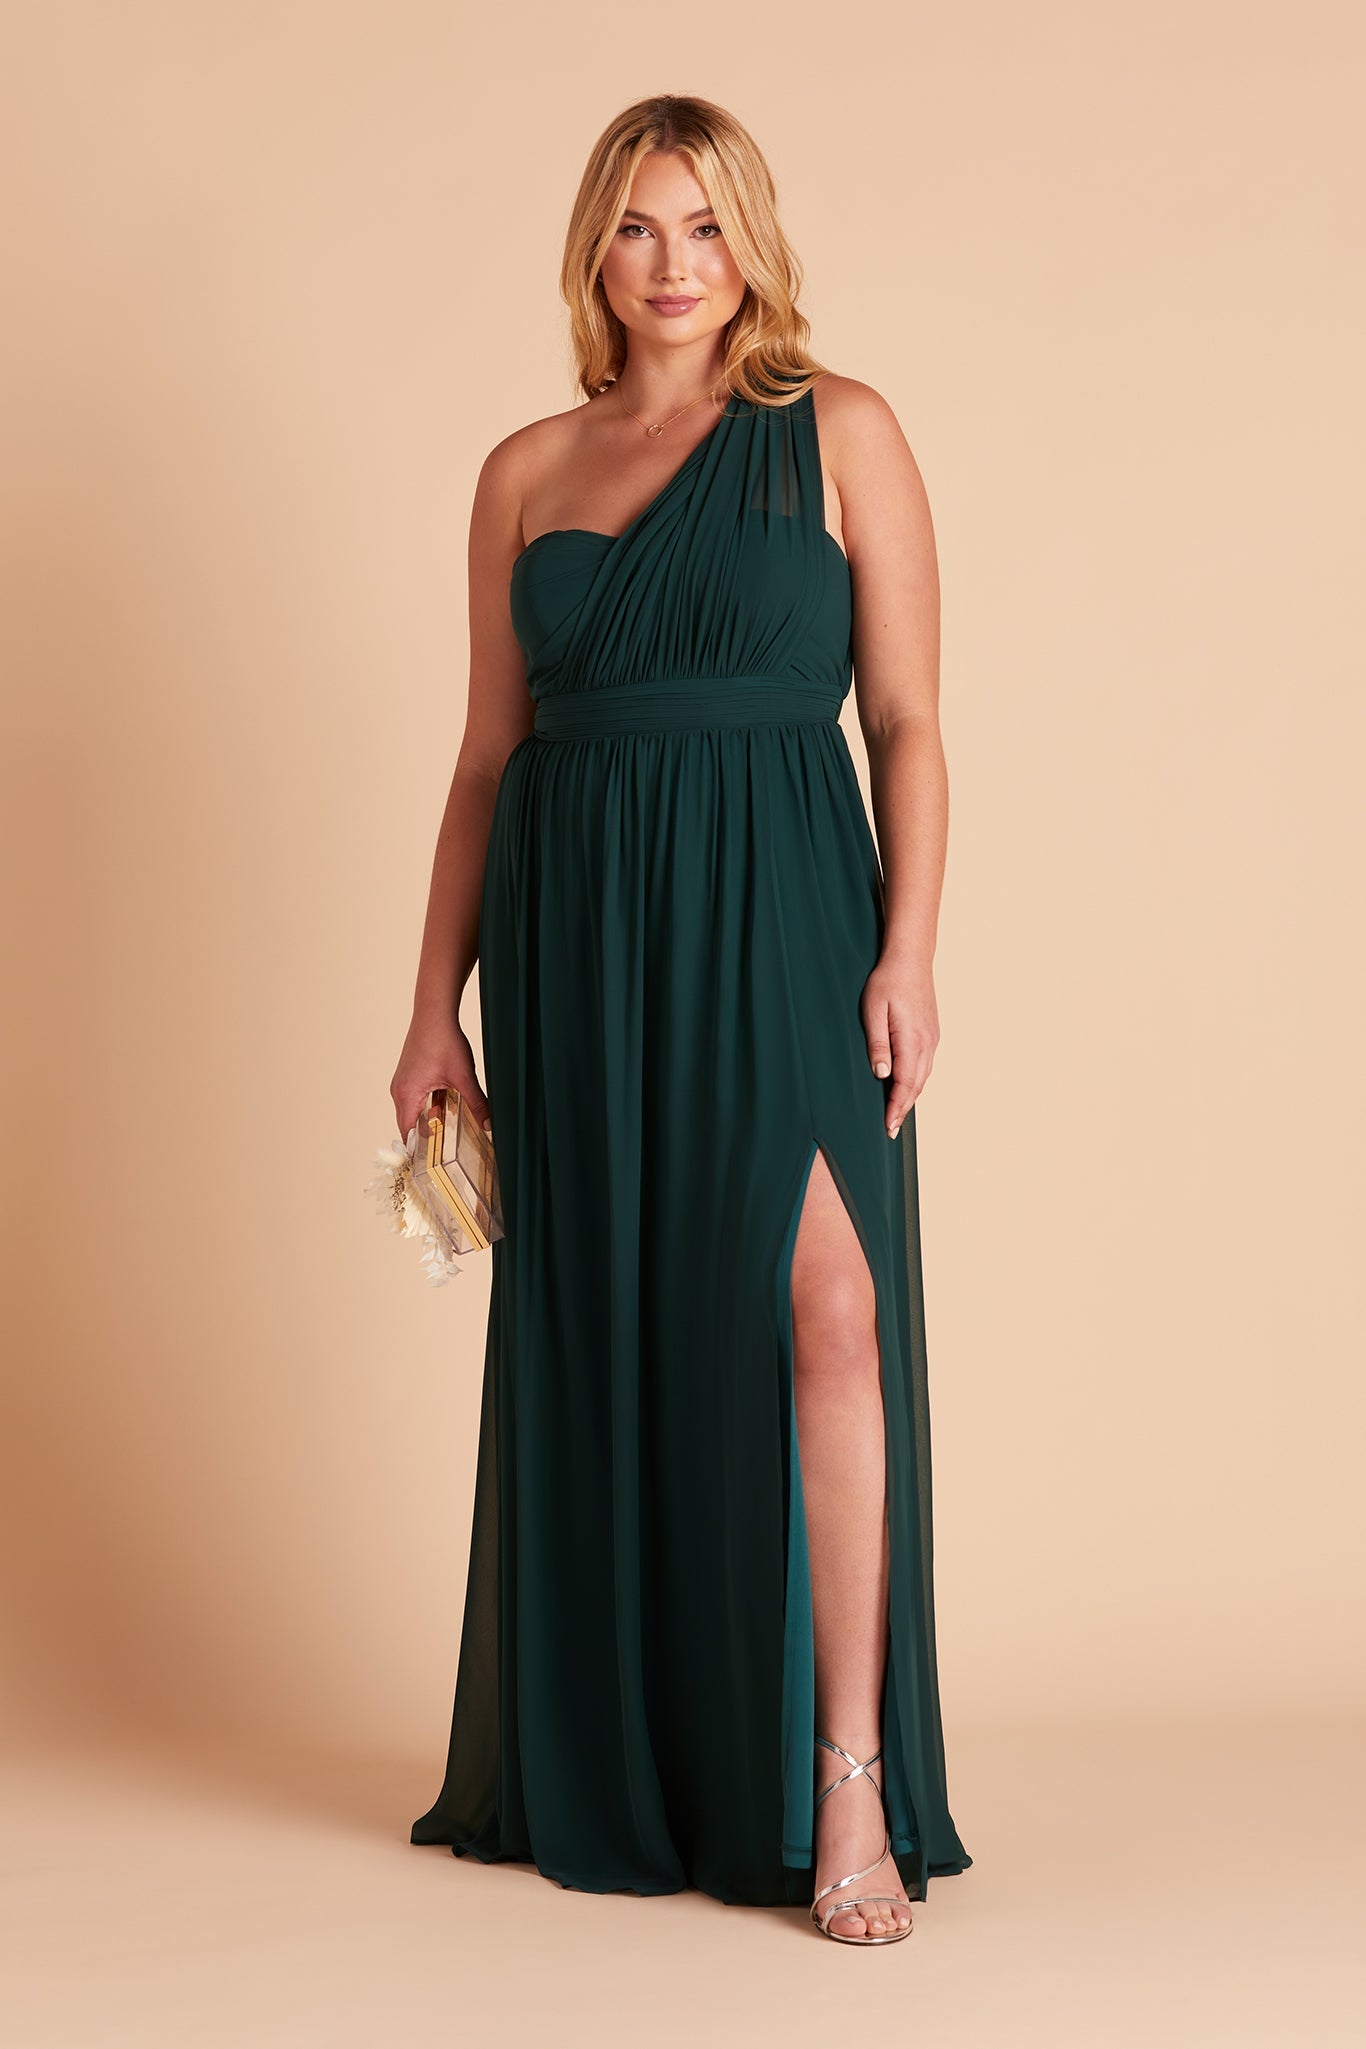 Front view of the floor-length Grace Convertible Plus Size Bridesmaid Dress in emerald chiffon features an optional slit in the flowing floor-length skirt over the left leg.